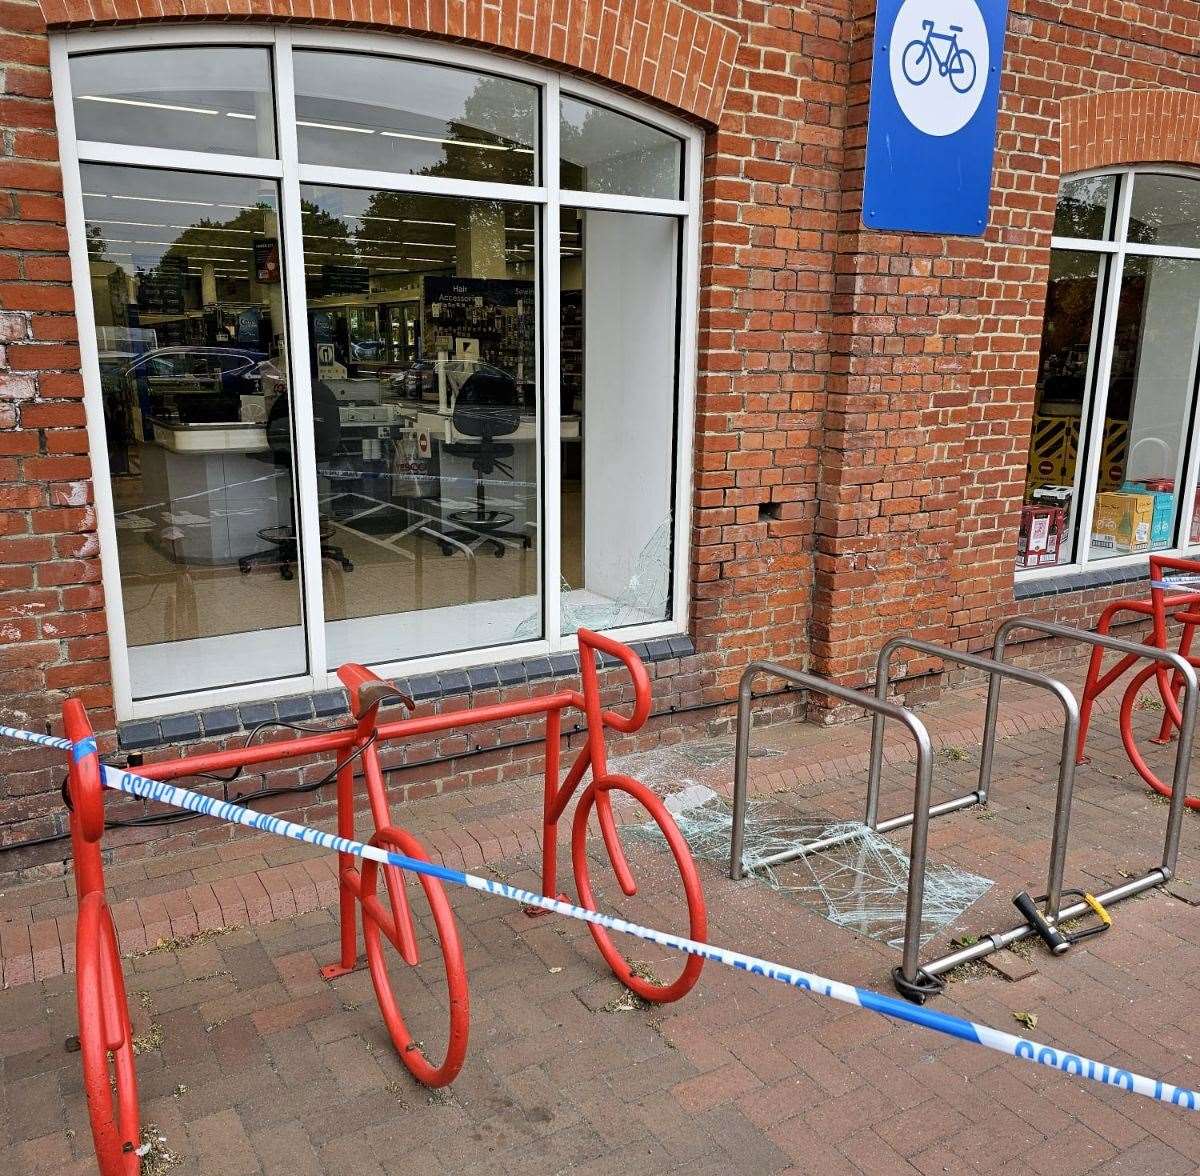 Police have taped off part of the Tesco Superstore in Faversham this morning following a break-in